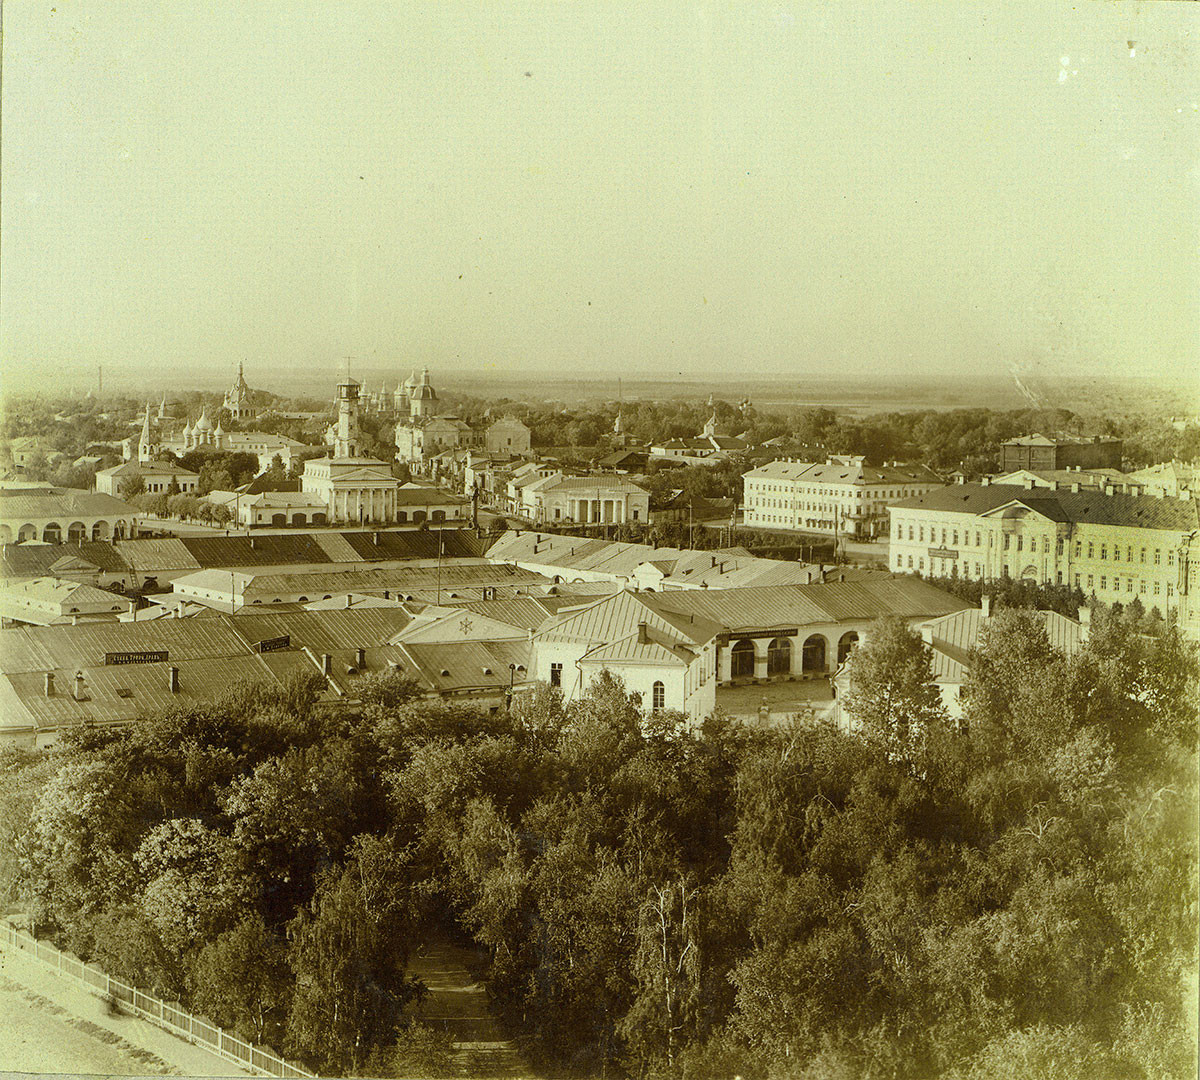 Kostroma. View of Susanin Square from bell tower of Epiphany Cathedral (demolished in 1934). Upper right: Epiphany Street leading to Epiphany Convent. Center: Fire tower on Susanin Square. Foreground. Large Flour Trading Rows. Summer 1910